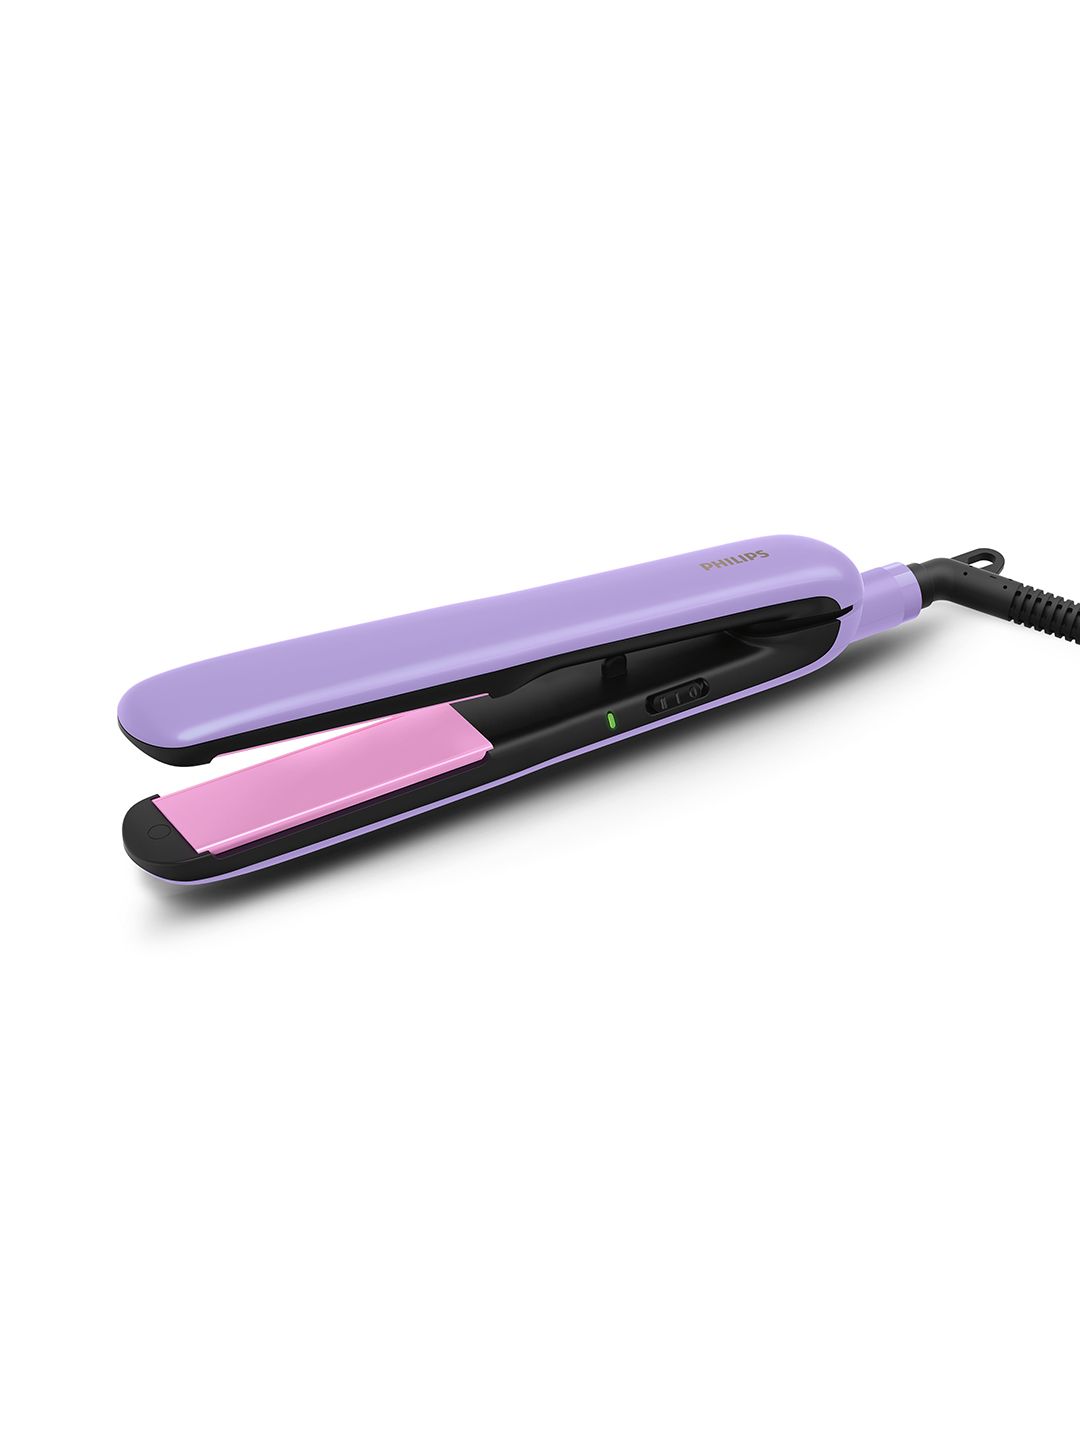 Philips BHS393/40 Silk Protect Technology Straightener-Lavender Price in India